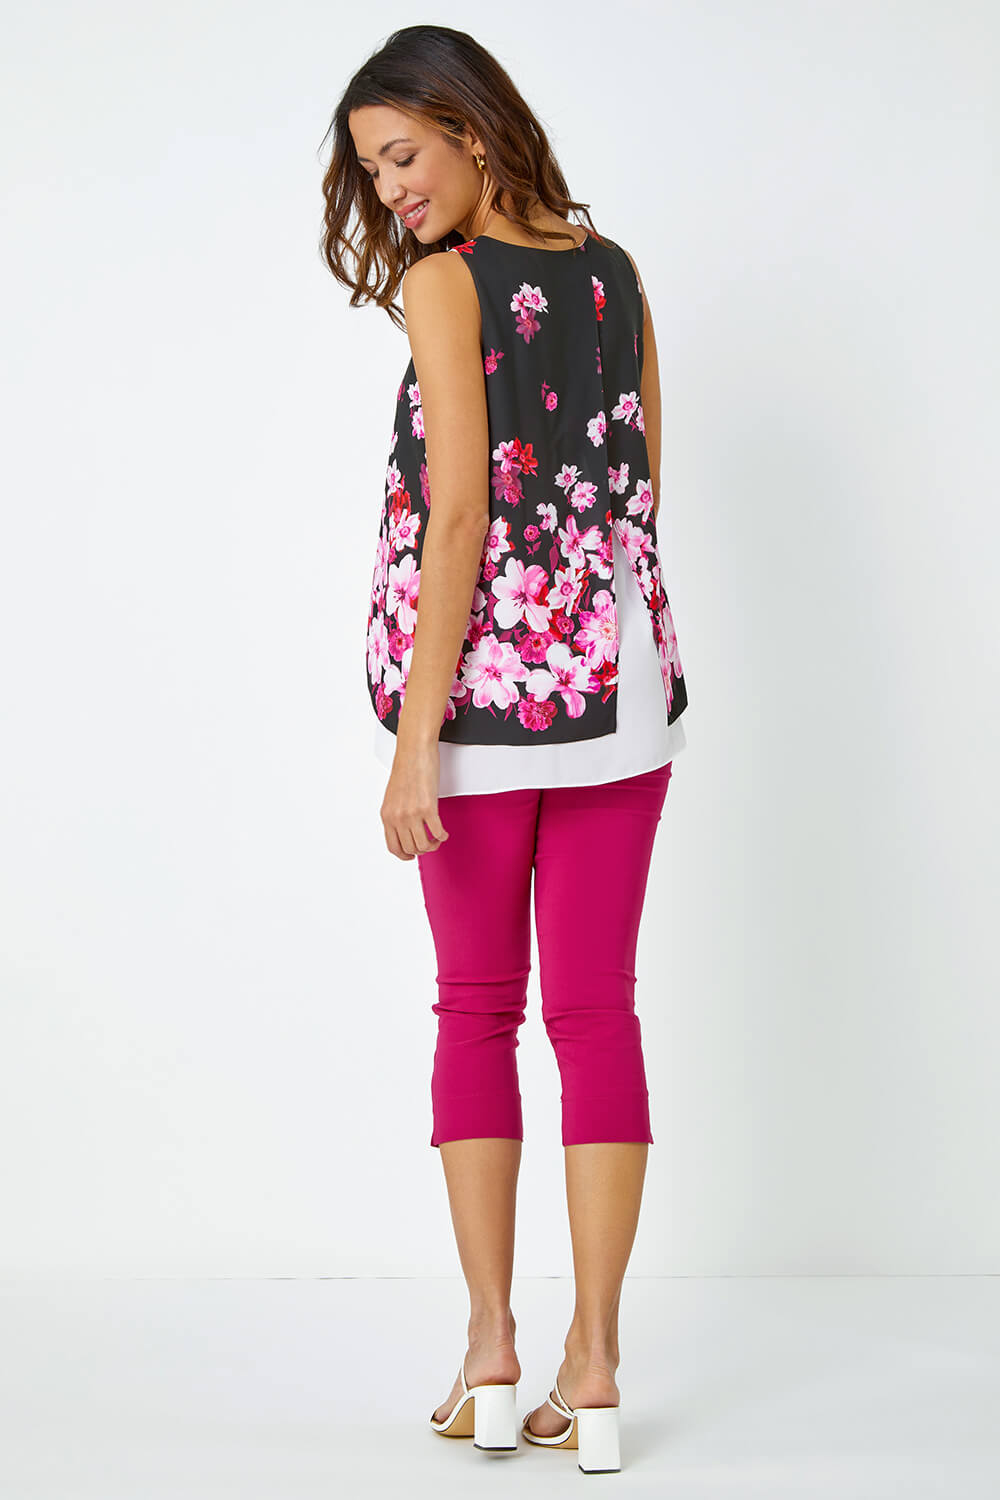 CERISE Sleeveless Floral Double Layer Top, Image 2 of 5